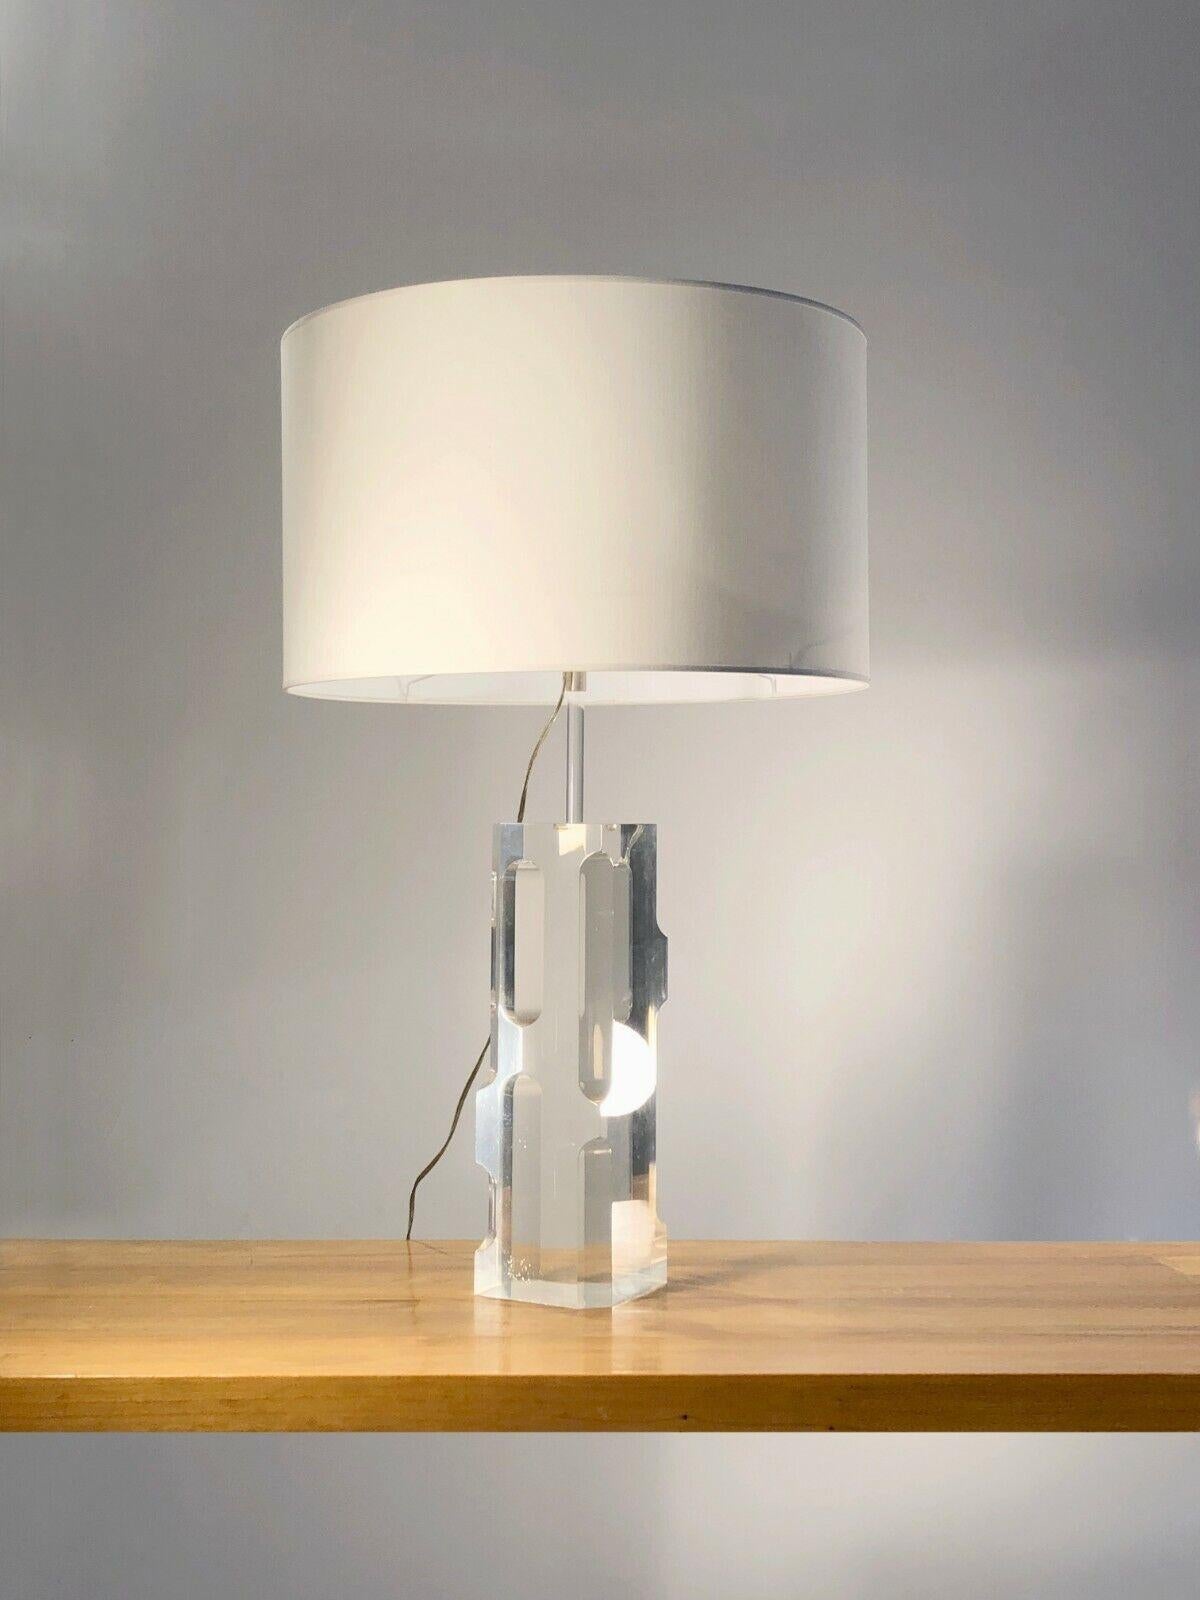 An exceptional and sculptural table lamp in prism, Post-Modernist, Seventies, Kinetic, Pop, body in a rectangular block of solid plexiglass with curved cut sides, forming a kind of prism reflecting light and reflections of the environment, by